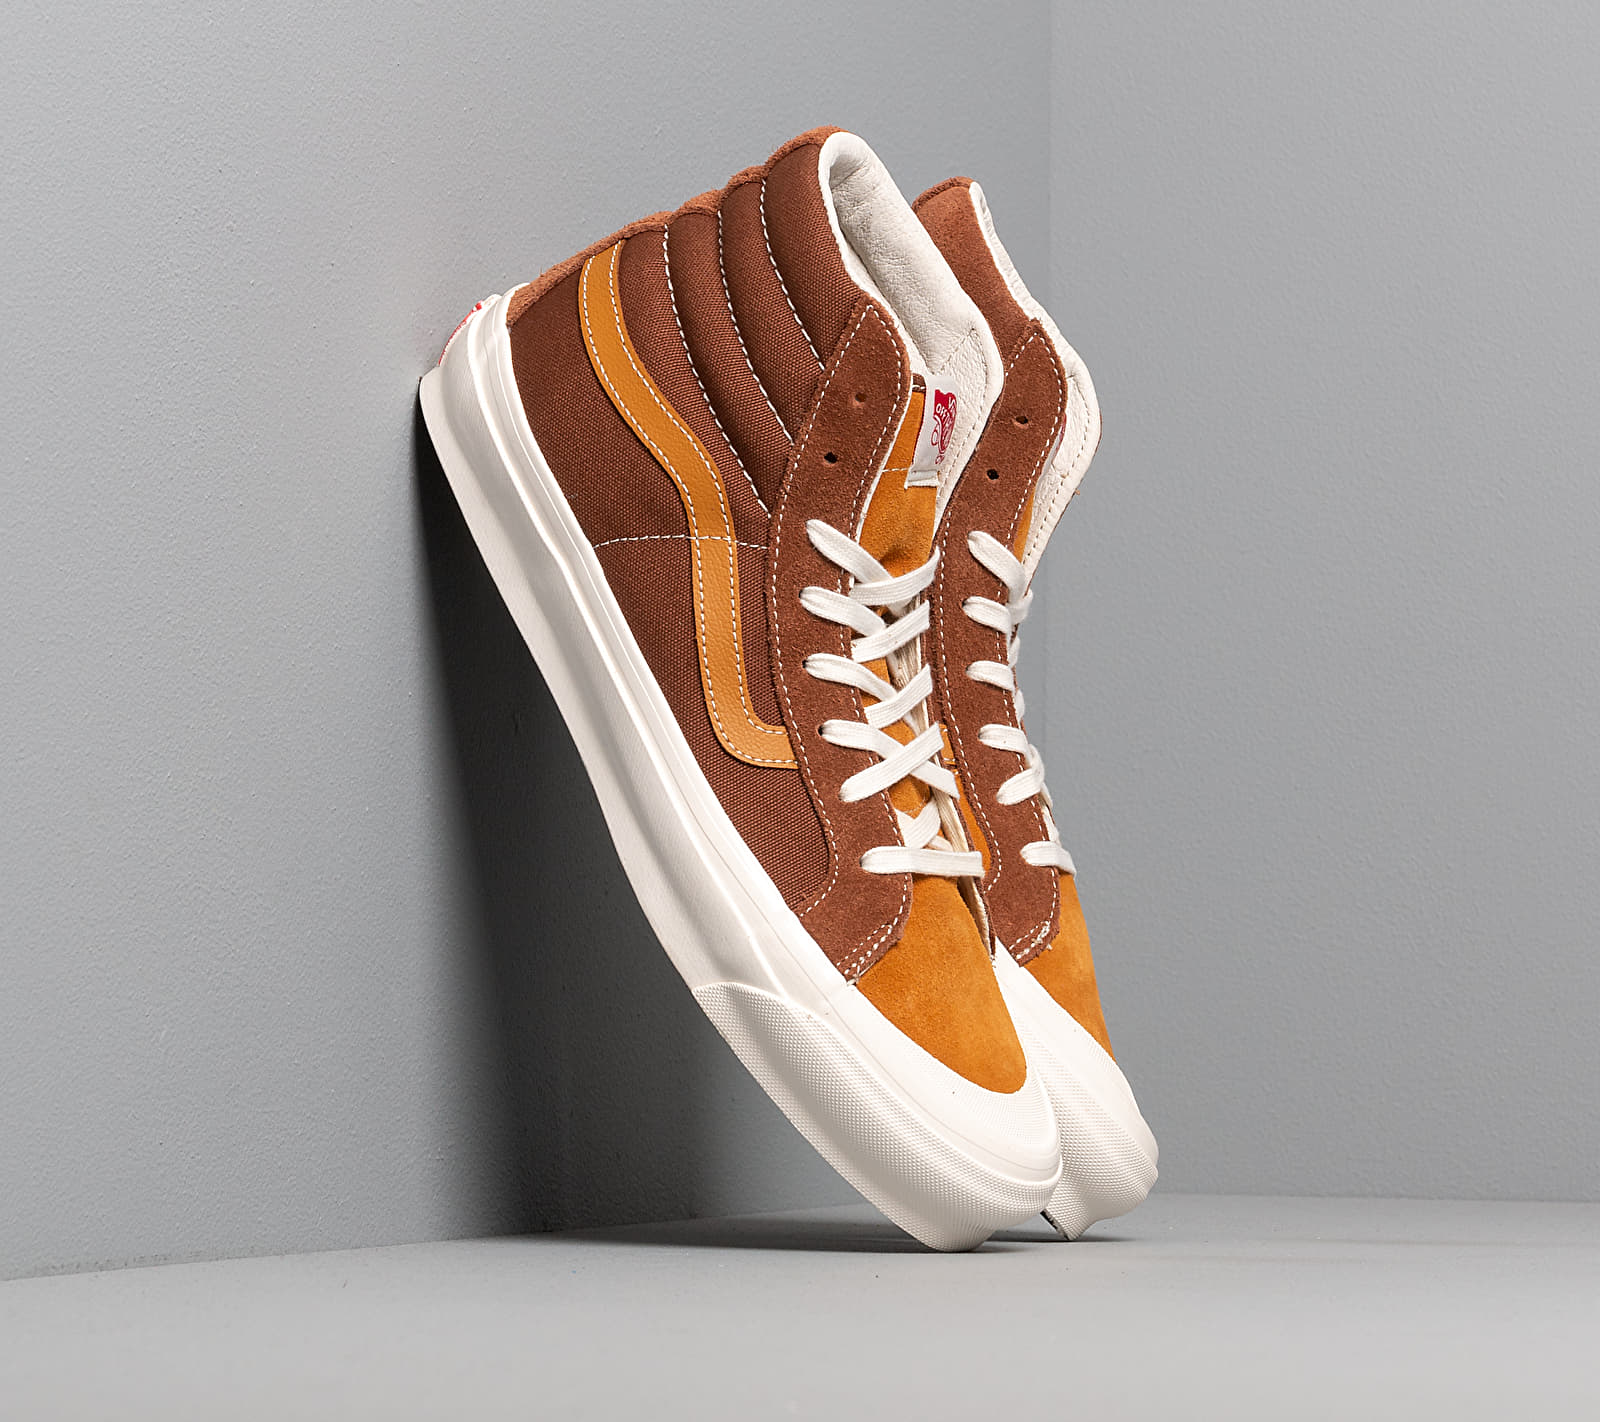 Vans OG Style 138 LX (Suede) Dachshund/ Brown VN0A45KDXEH1